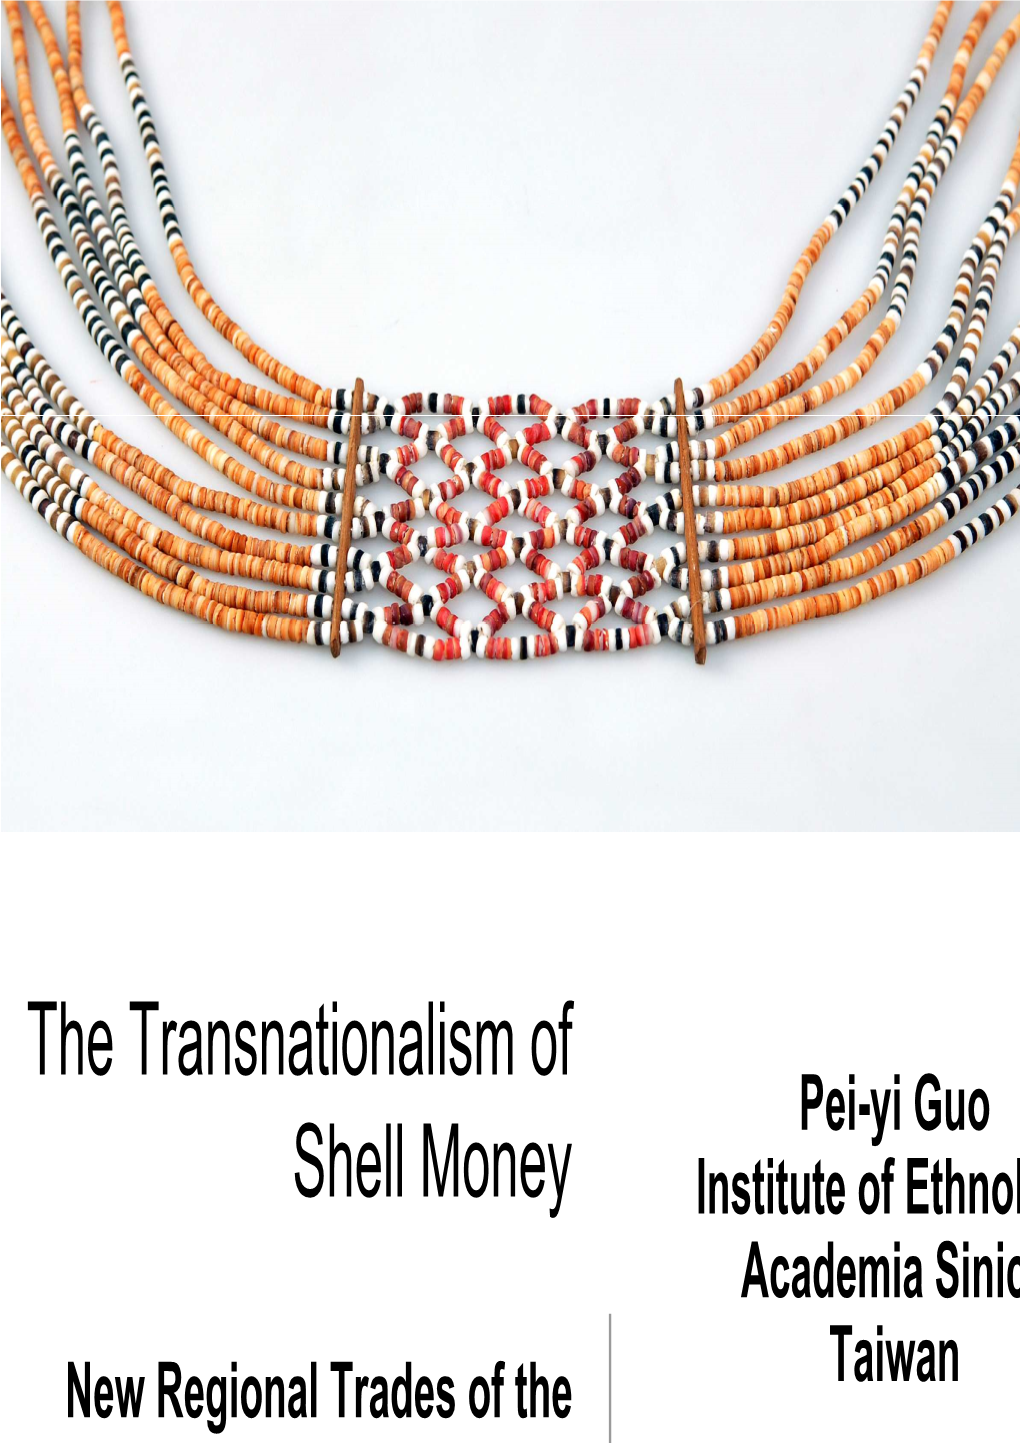 The Transnationalism of Shell Money